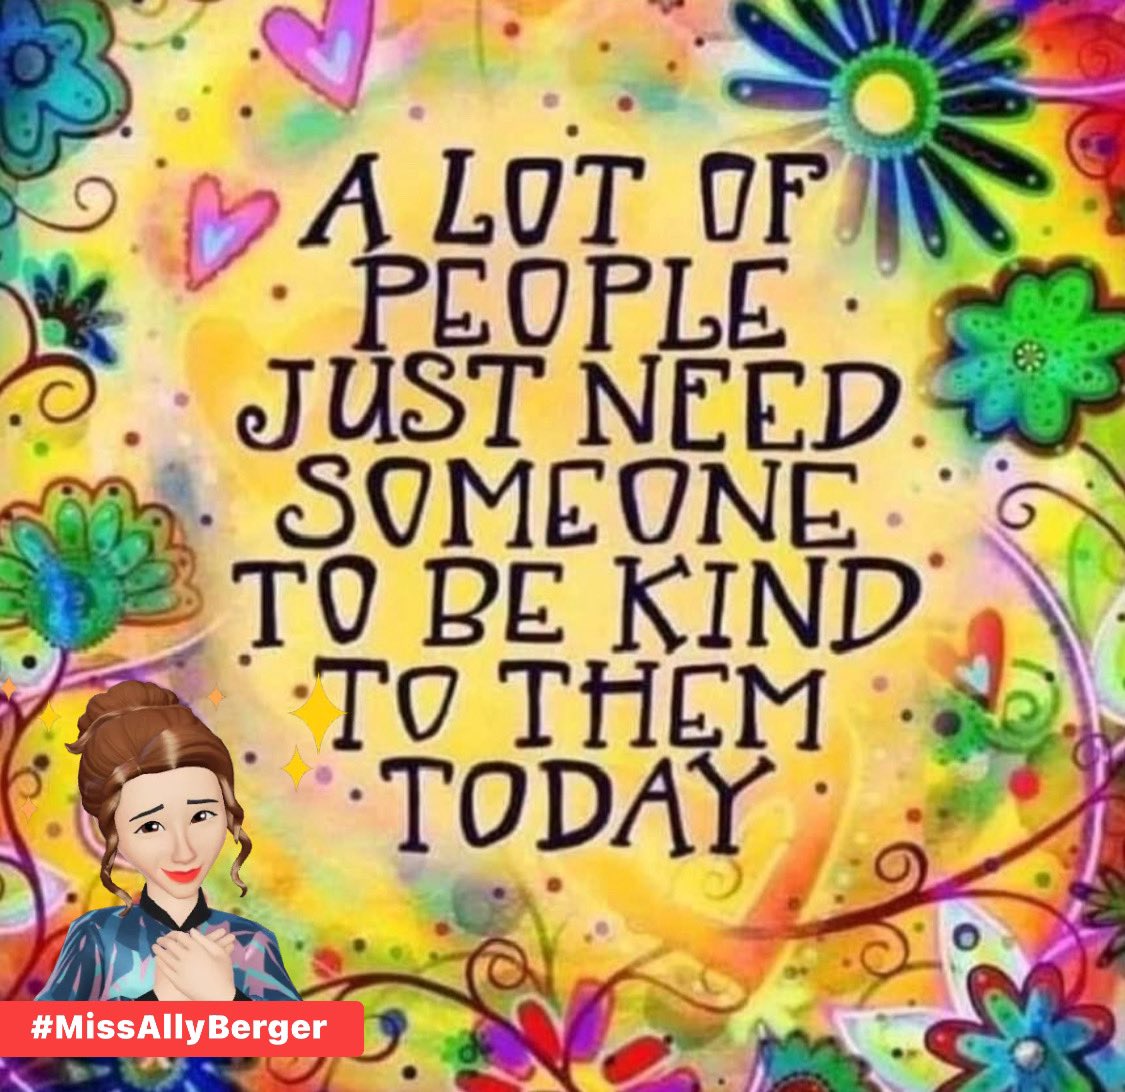 A LOT OF PEOPLE JUST NEED SOMEONE TO BE KIND TO THEM TODAY

#Kind
#KindnessMatters
#KindnessIsContagious
#KindnessIsFree
#KindnessIsMagic
#KindnessChallenge
#KindnessChallenge2024

#TrendingHot 🔥

#BJPFoundationDay 
#BrighterOnMINGYUDay 

#MissAllyBerger
@MissAllyBerger